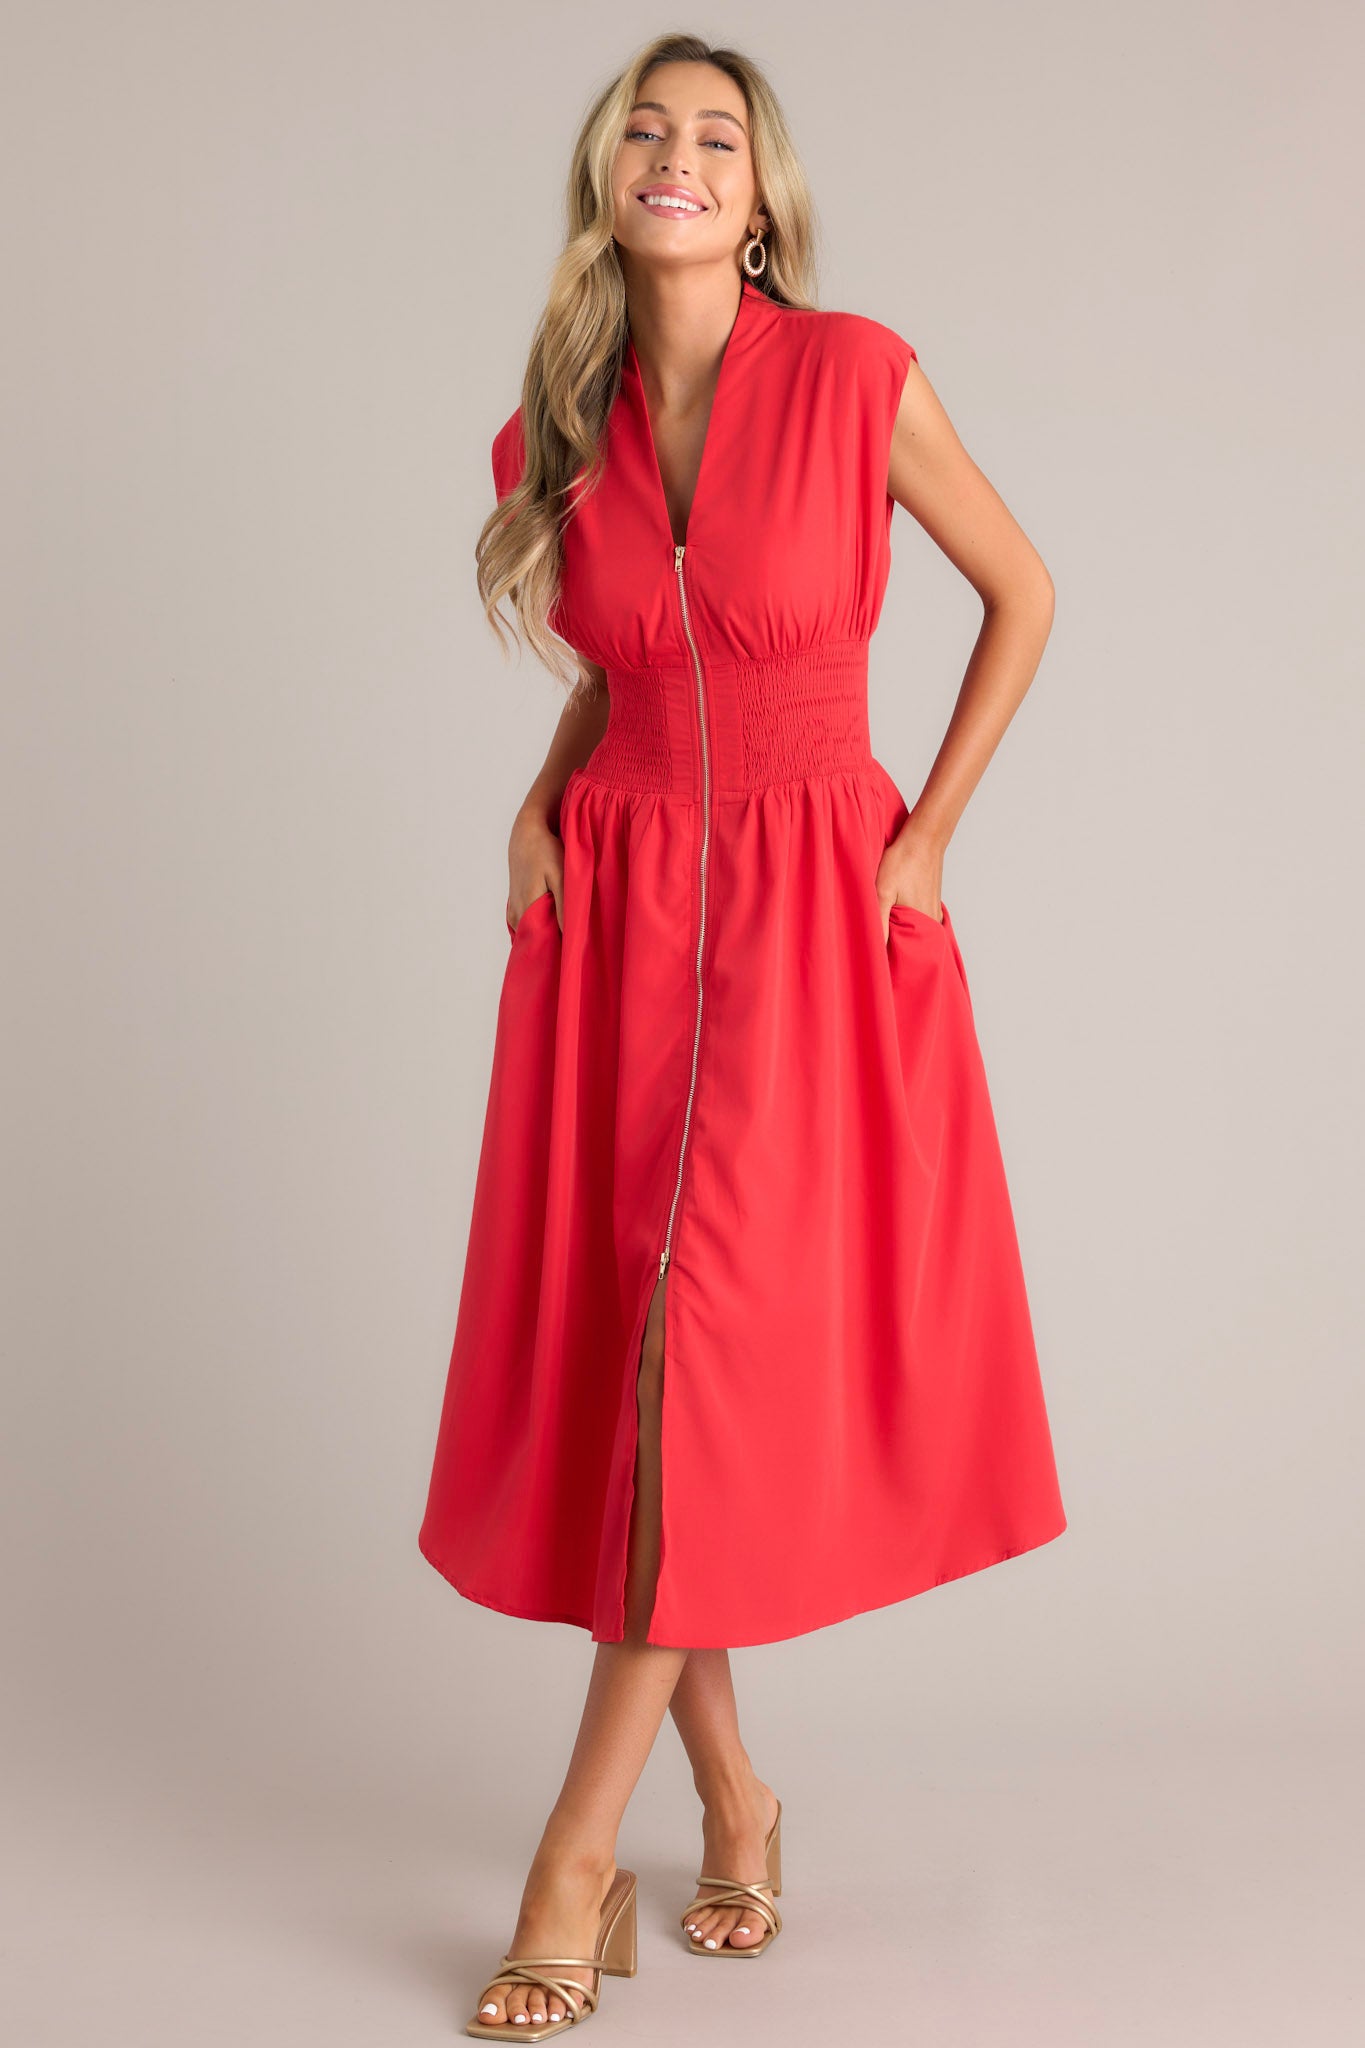 This red midi dress features a v-neckline, padded shoulders, a full zipper front, a fully smocked waist, functional hip pockets, and a front slit.